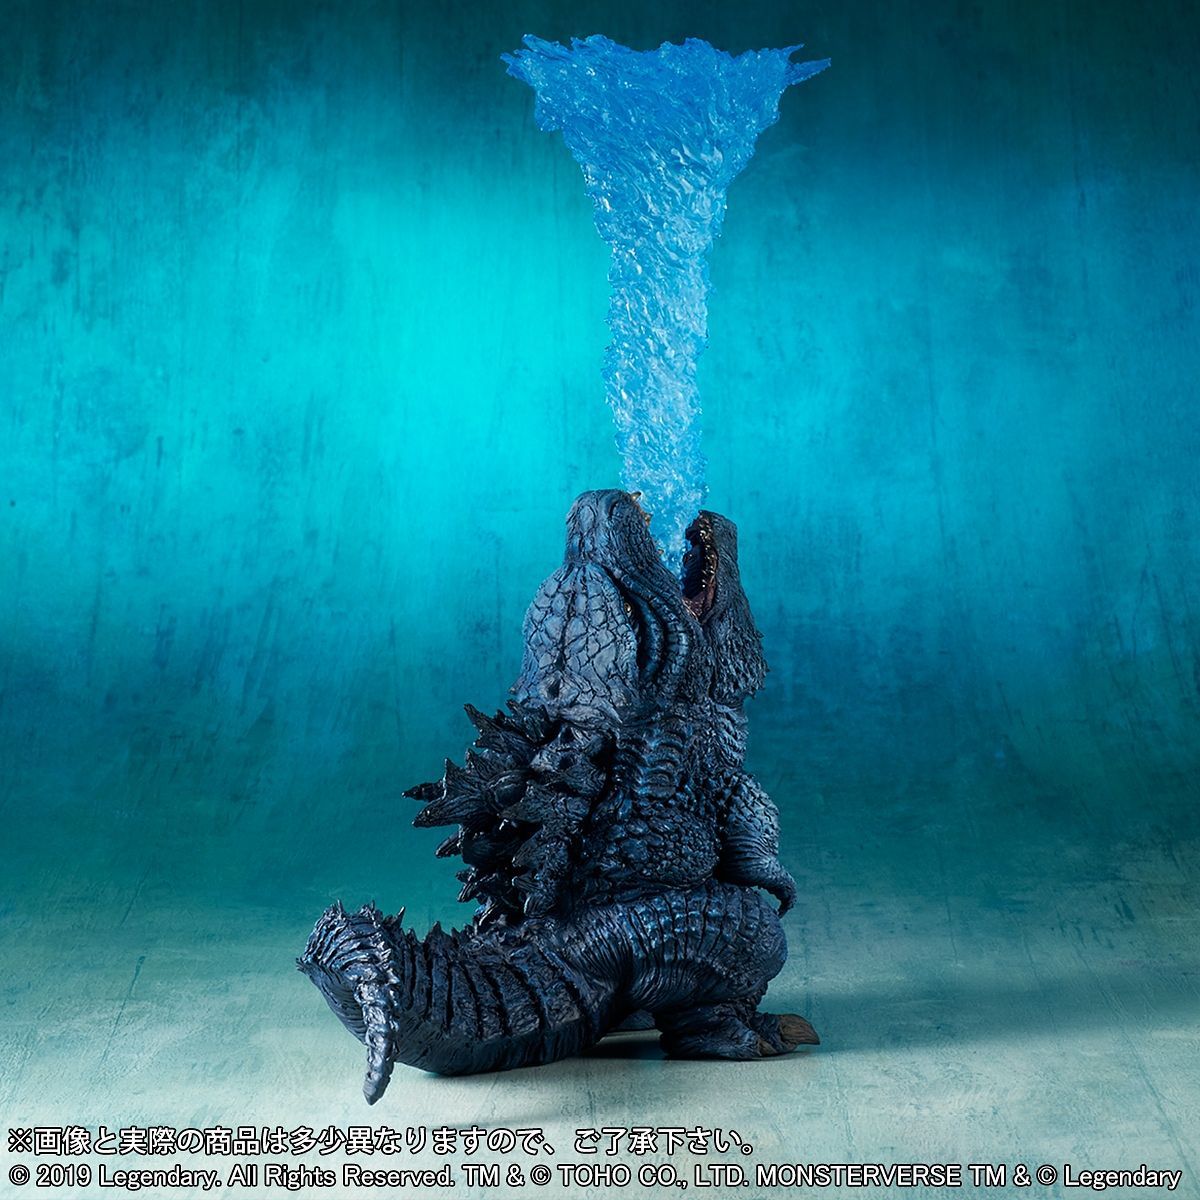 X-Plus - Defo-Real - Godzilla: King of the Monsters (2019) - Godzilla (Shonen Ric Limited Edition with Light-Up Effect) - Marvelous Toys